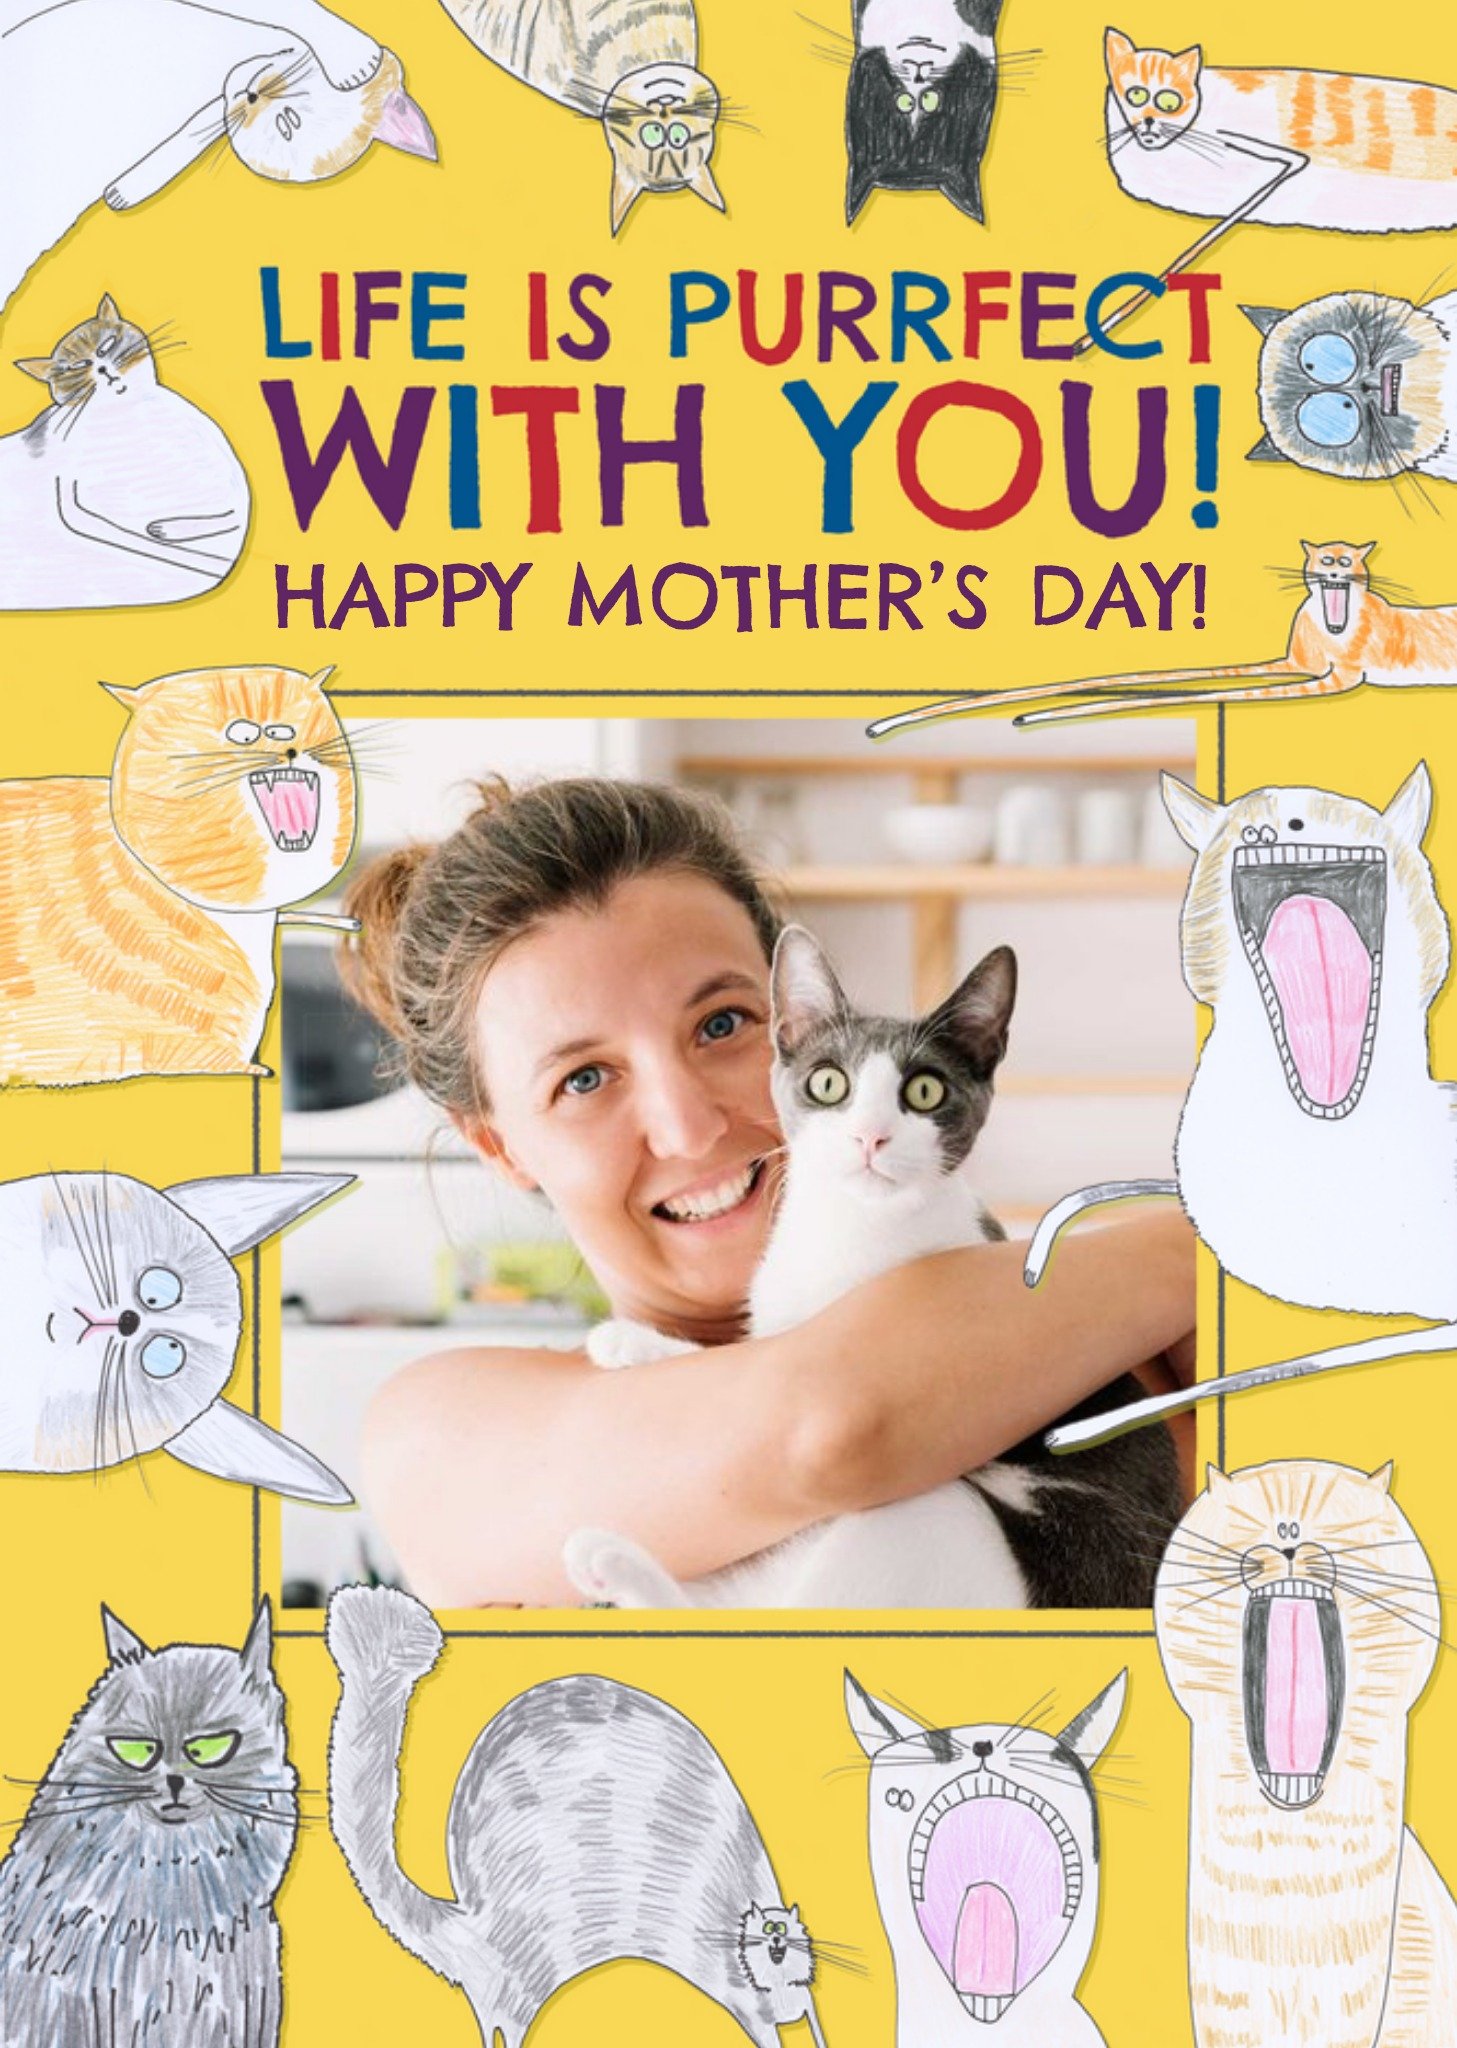 Hercule Van Wolfwinkle Quirky Illustrations Of Cats Humorous Photo Upload Mother's Day Card Ecard